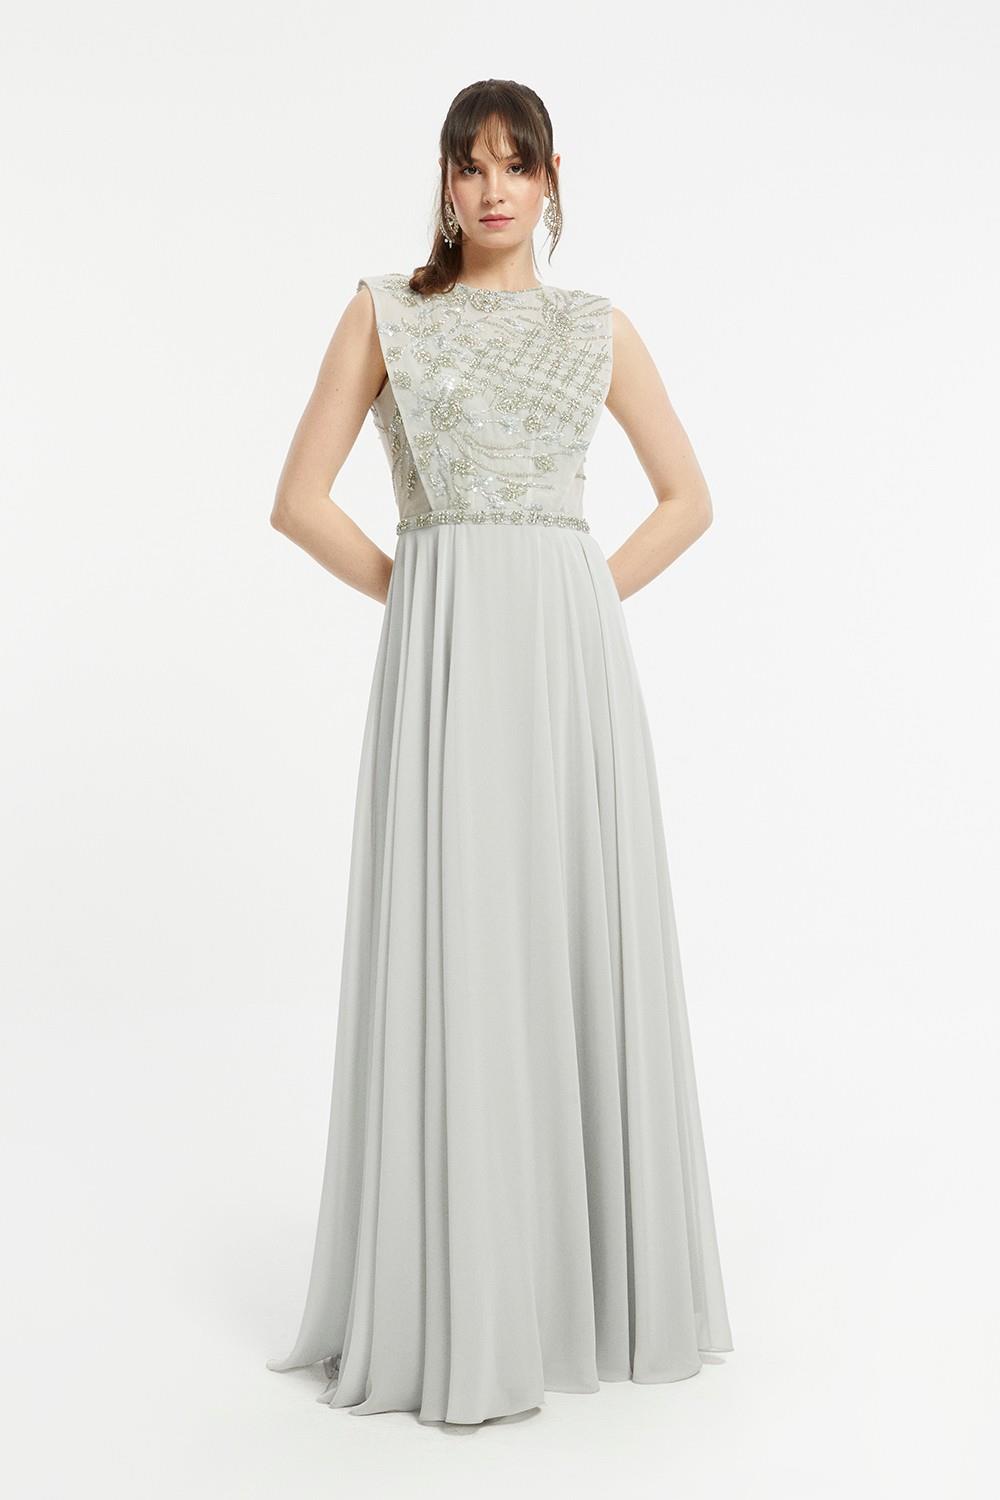 Zero Sleeve Bling Embroidered Long Evening Dress